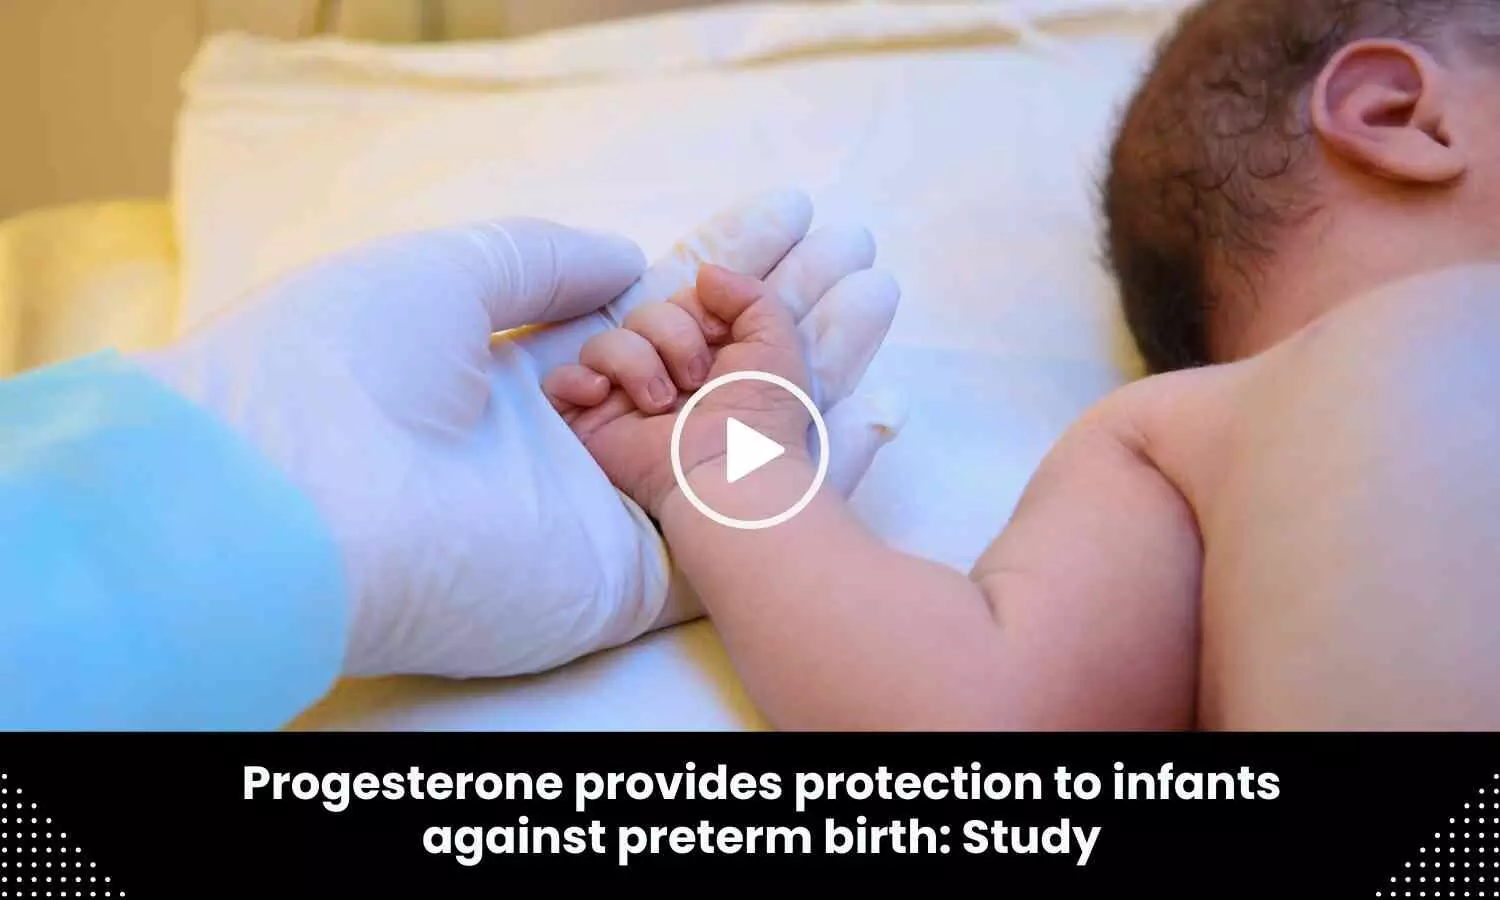 Progesterone protects infants against preterm birth: BMJ